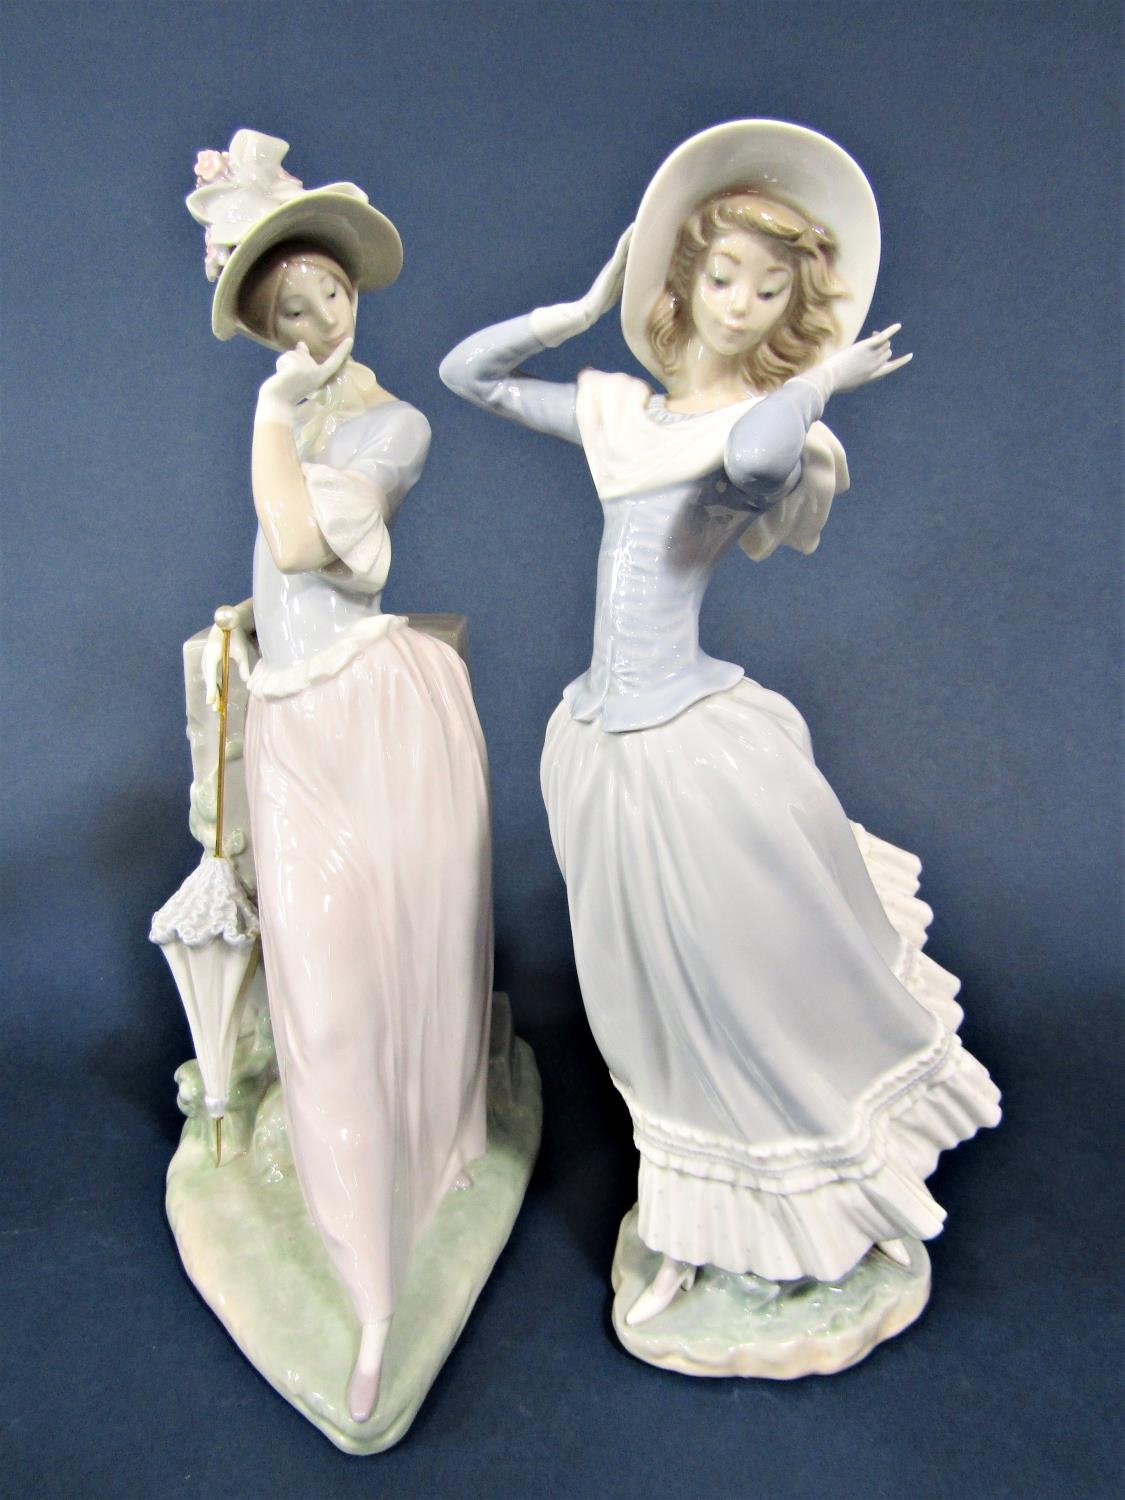 A large Lladro figure of an elegant lady with bonnet and parasol, 38 cm tall approximately, together